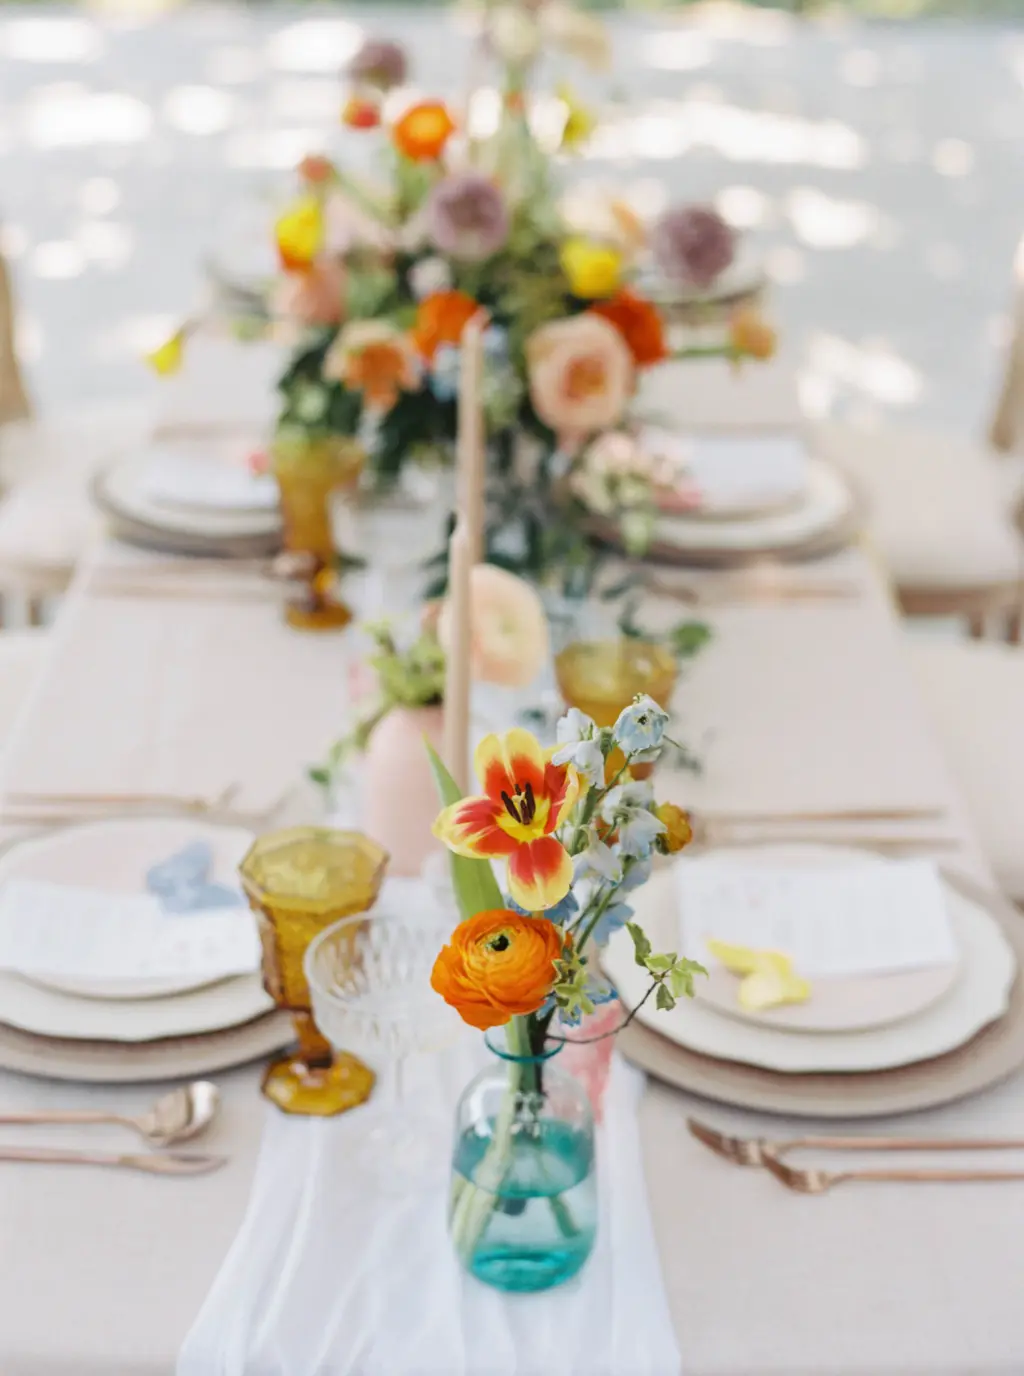 Bud Vase Centerpieces with Orange Ranunculus, Tulips, and Blue Stock Flowers | White Cheesecloth Table Runners | Whimsical Vineyard Wedding Reception Inspiration | Tampa Bay Florist Save The Date Florida